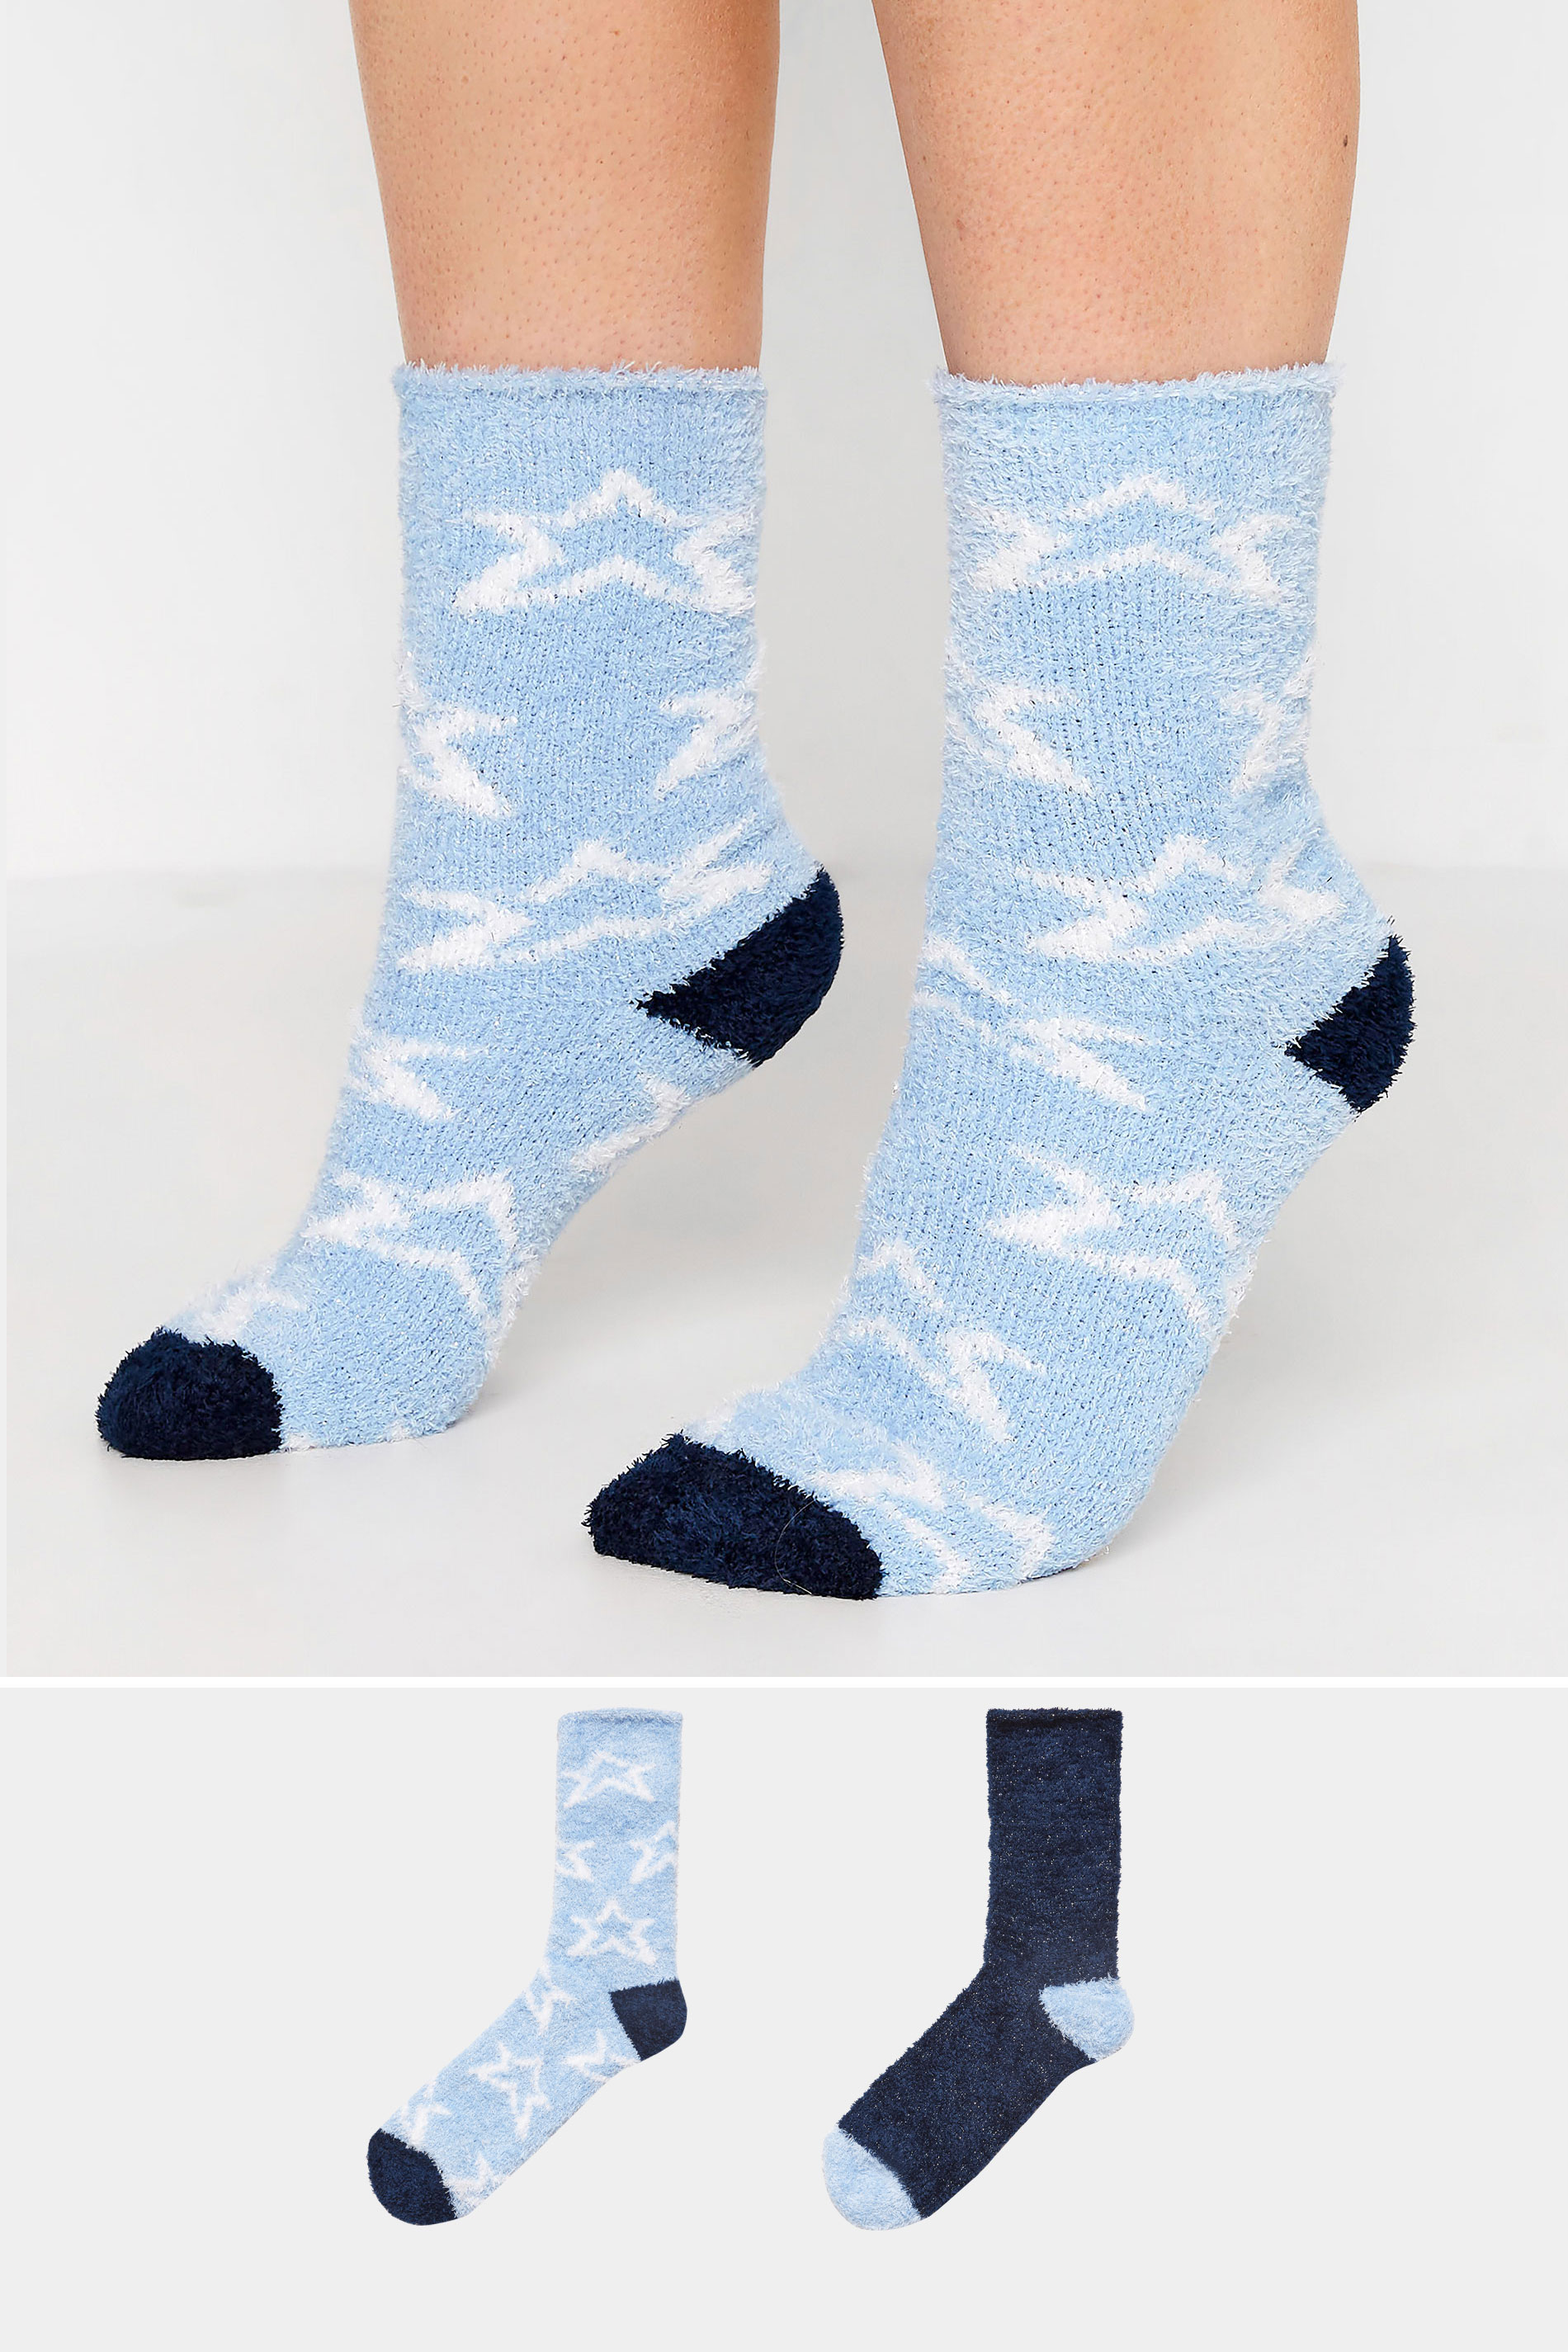 2 PACK Blue Metallic Star Print Fluffy Ankle Socks | Yours Clothing 1